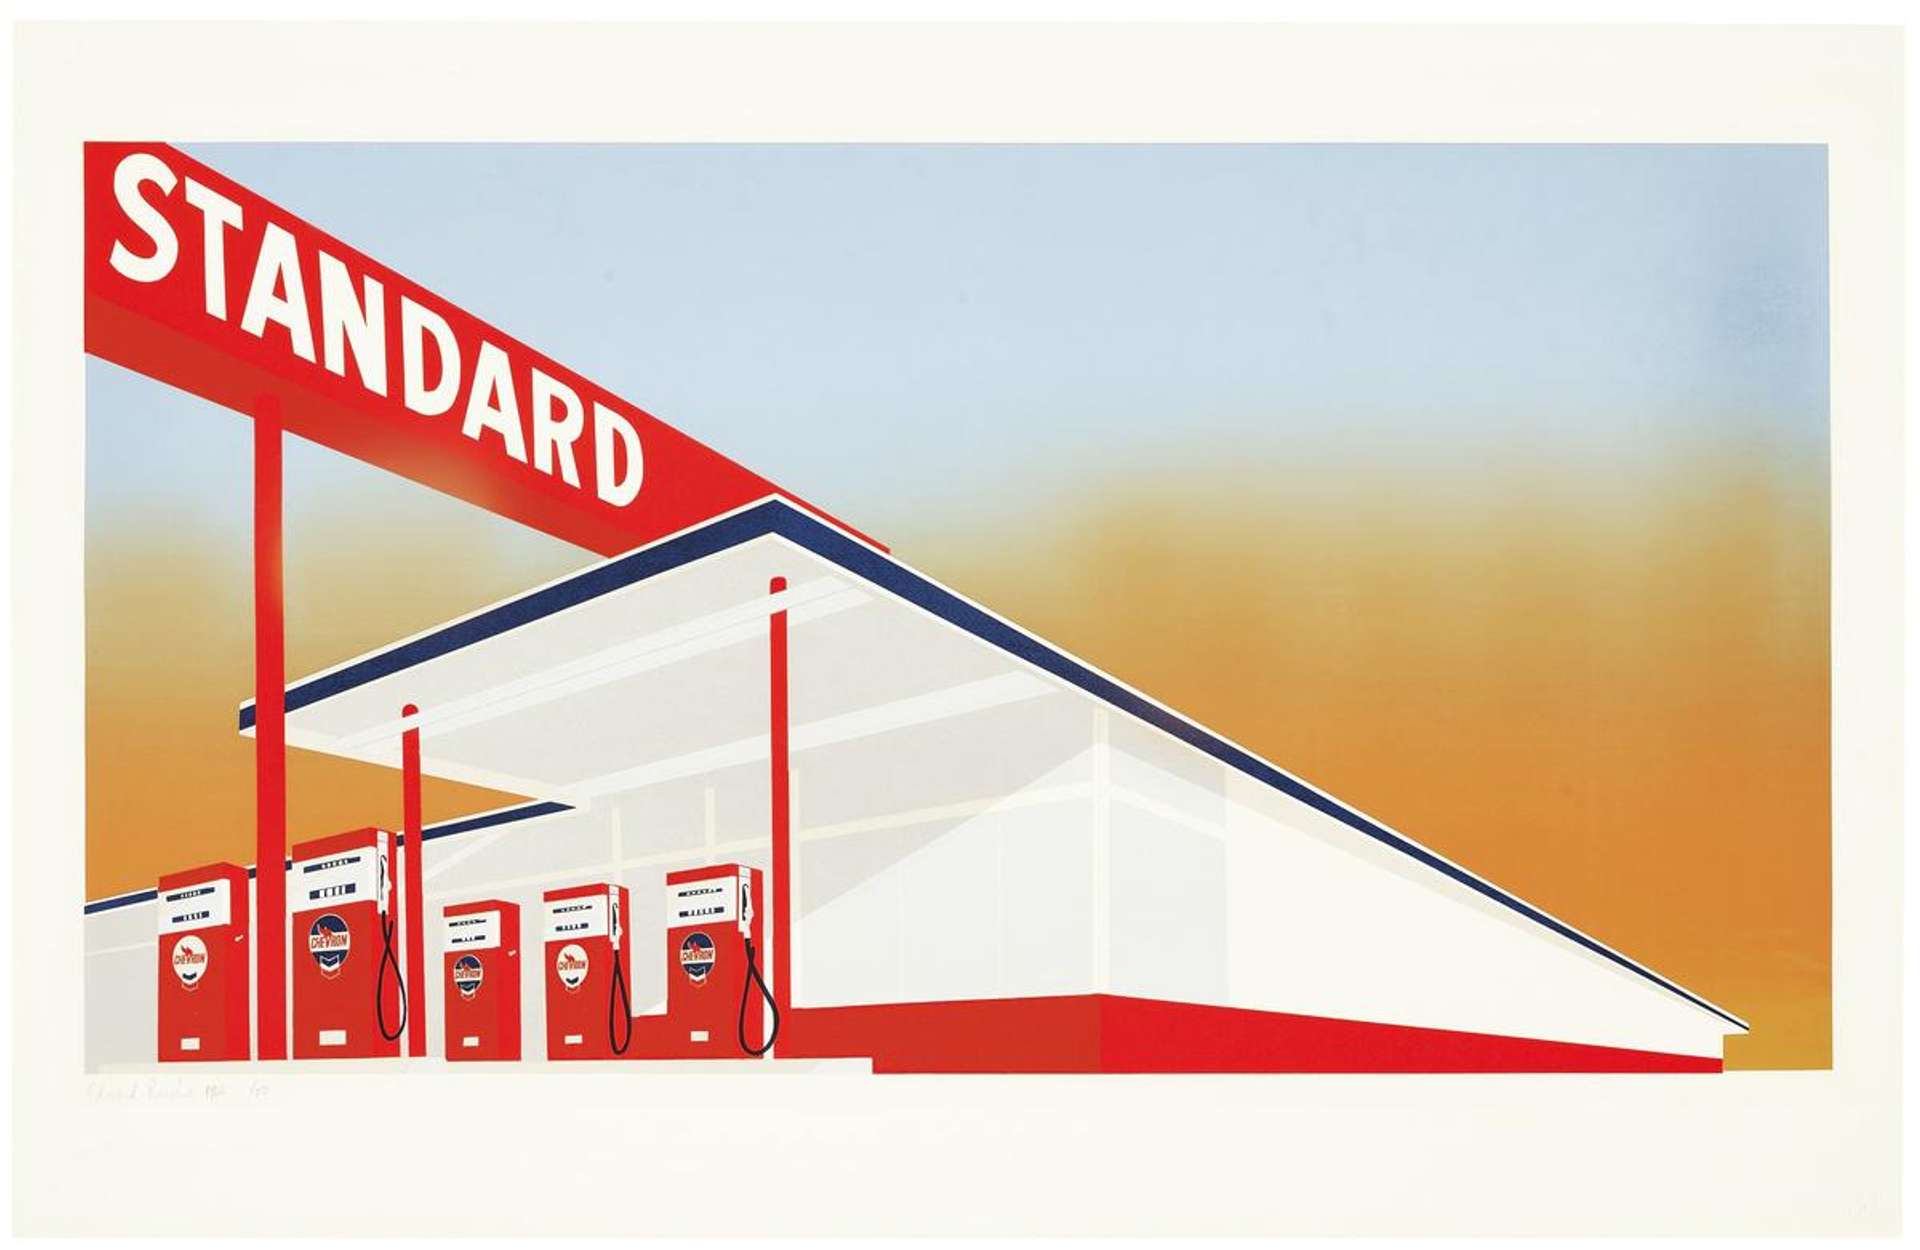 Screenprint by Ed Ruscha depicting a gas station in white, red and blue, set against a pale blue and mustard yellow sky.